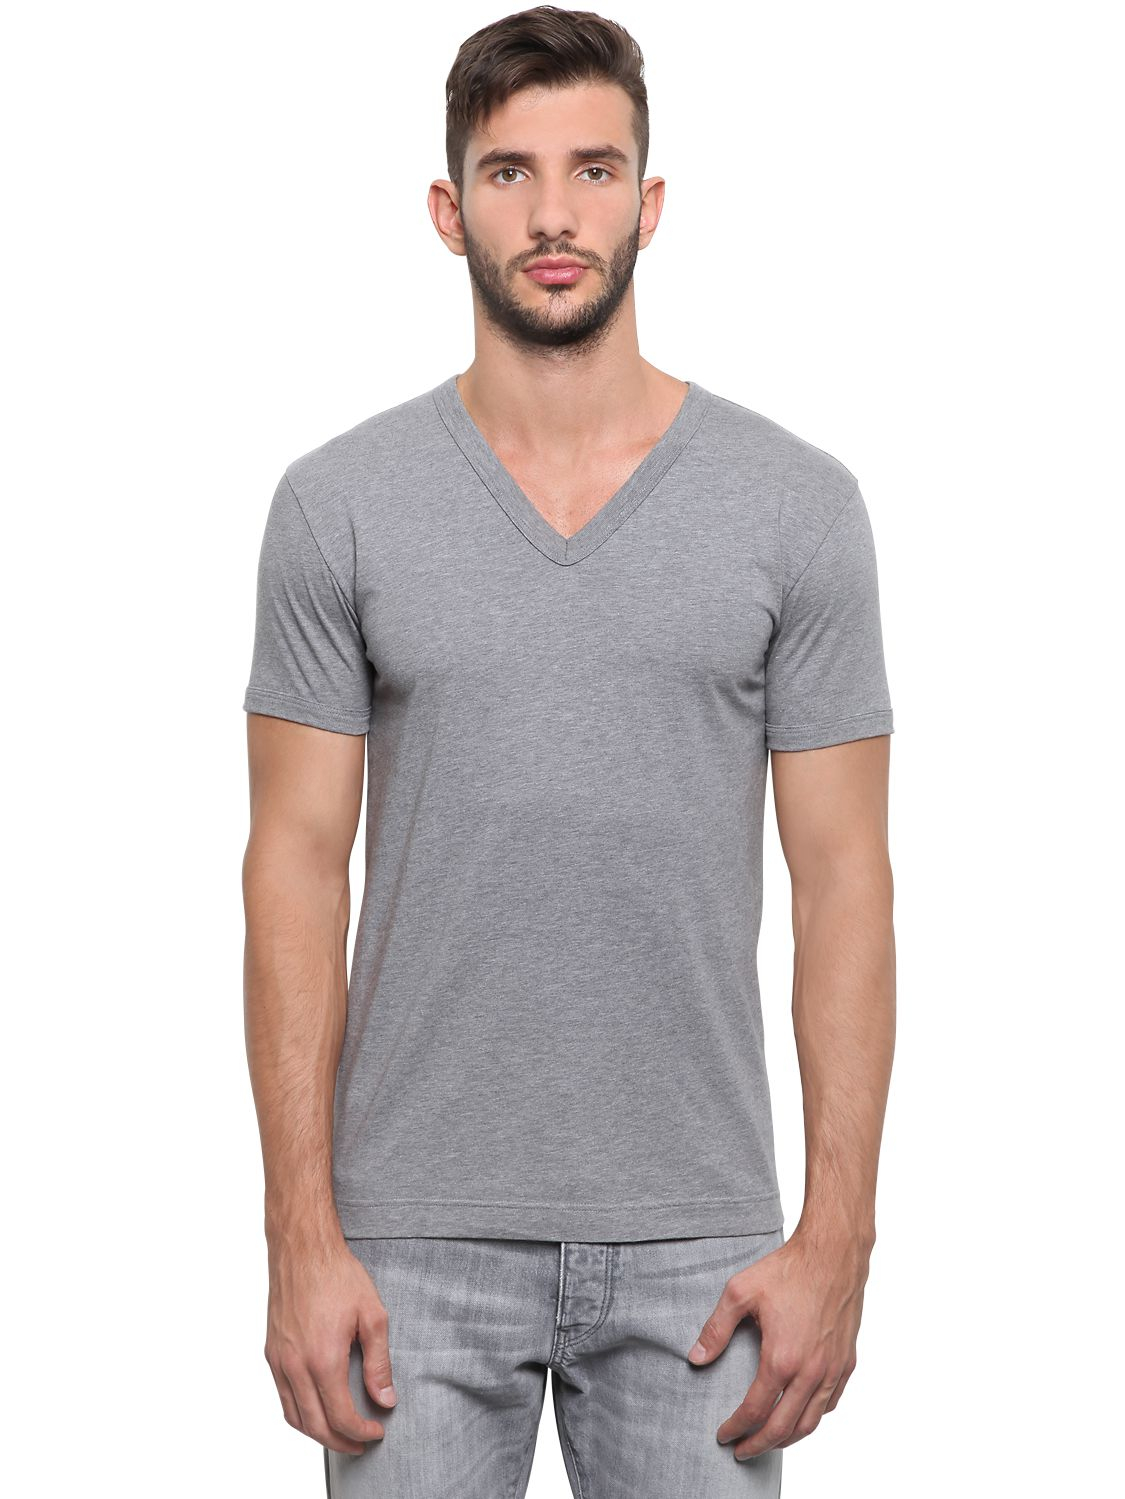 Lyst - Dolce & Gabbana Cotton Jersey V Neck T-shirt in Gray for Men